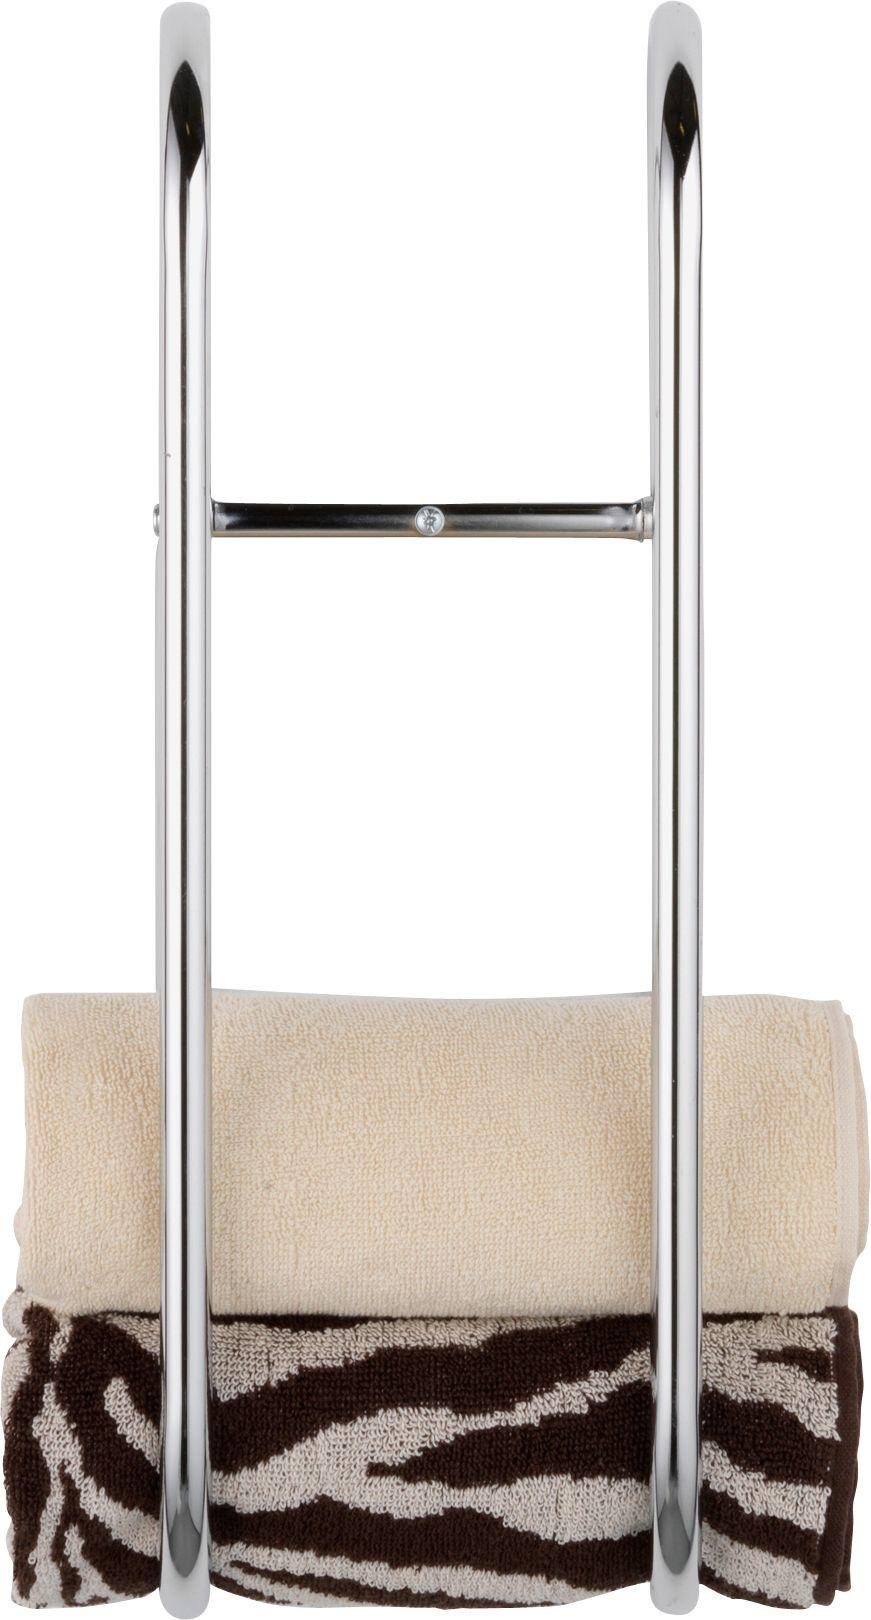 Argos Home Wall Mounted Chrome Towel Holder Review